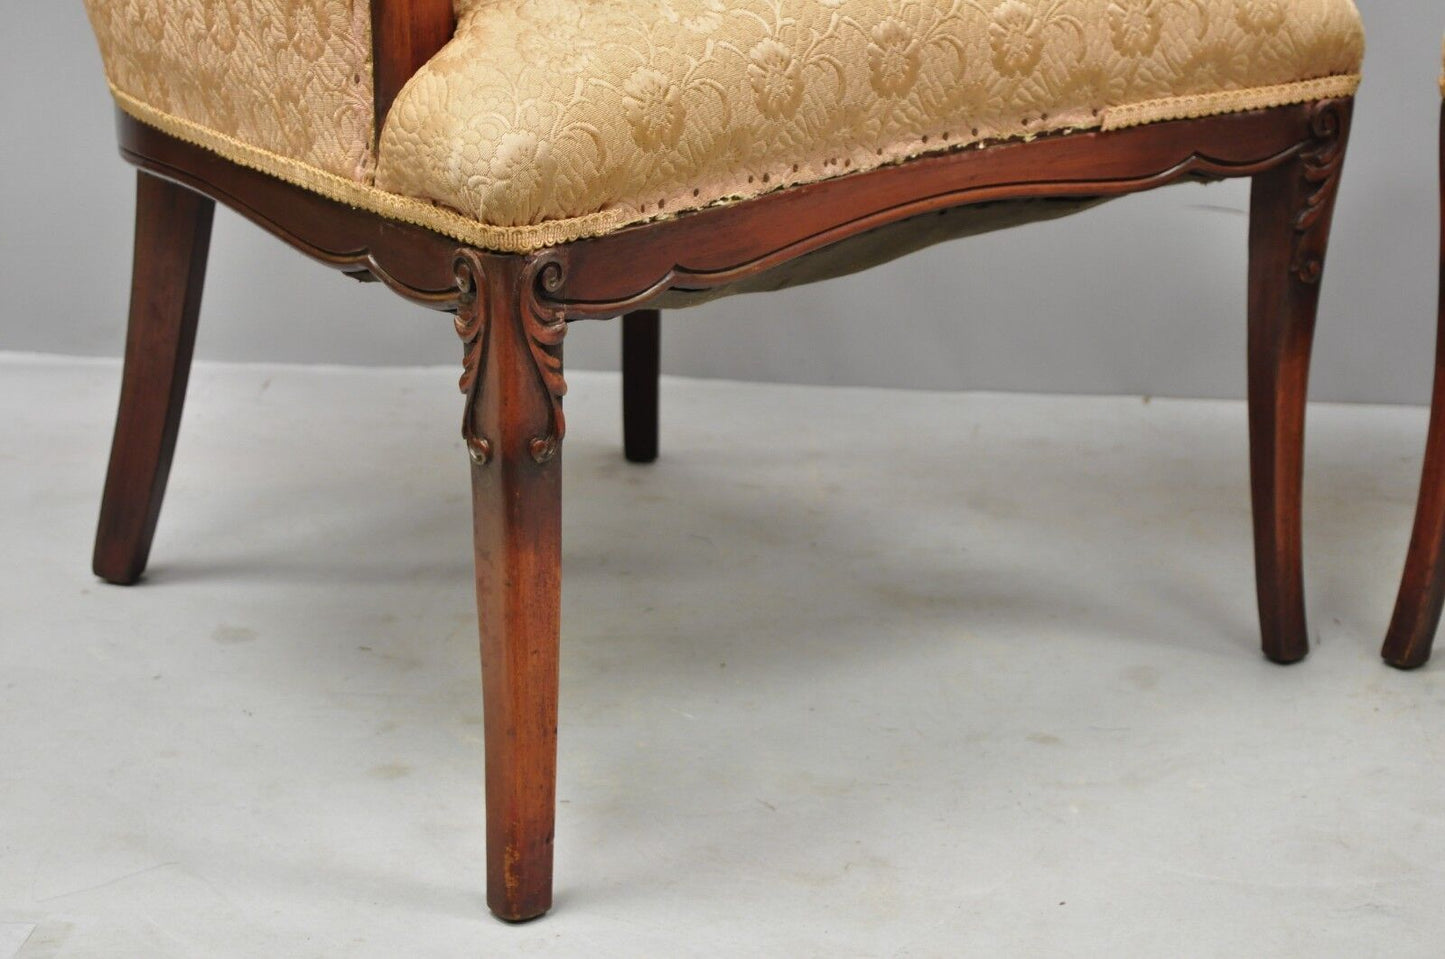 Pair Vtg Hollywood Regency French Style Mahogany Armchairs After Dorothy Drapes